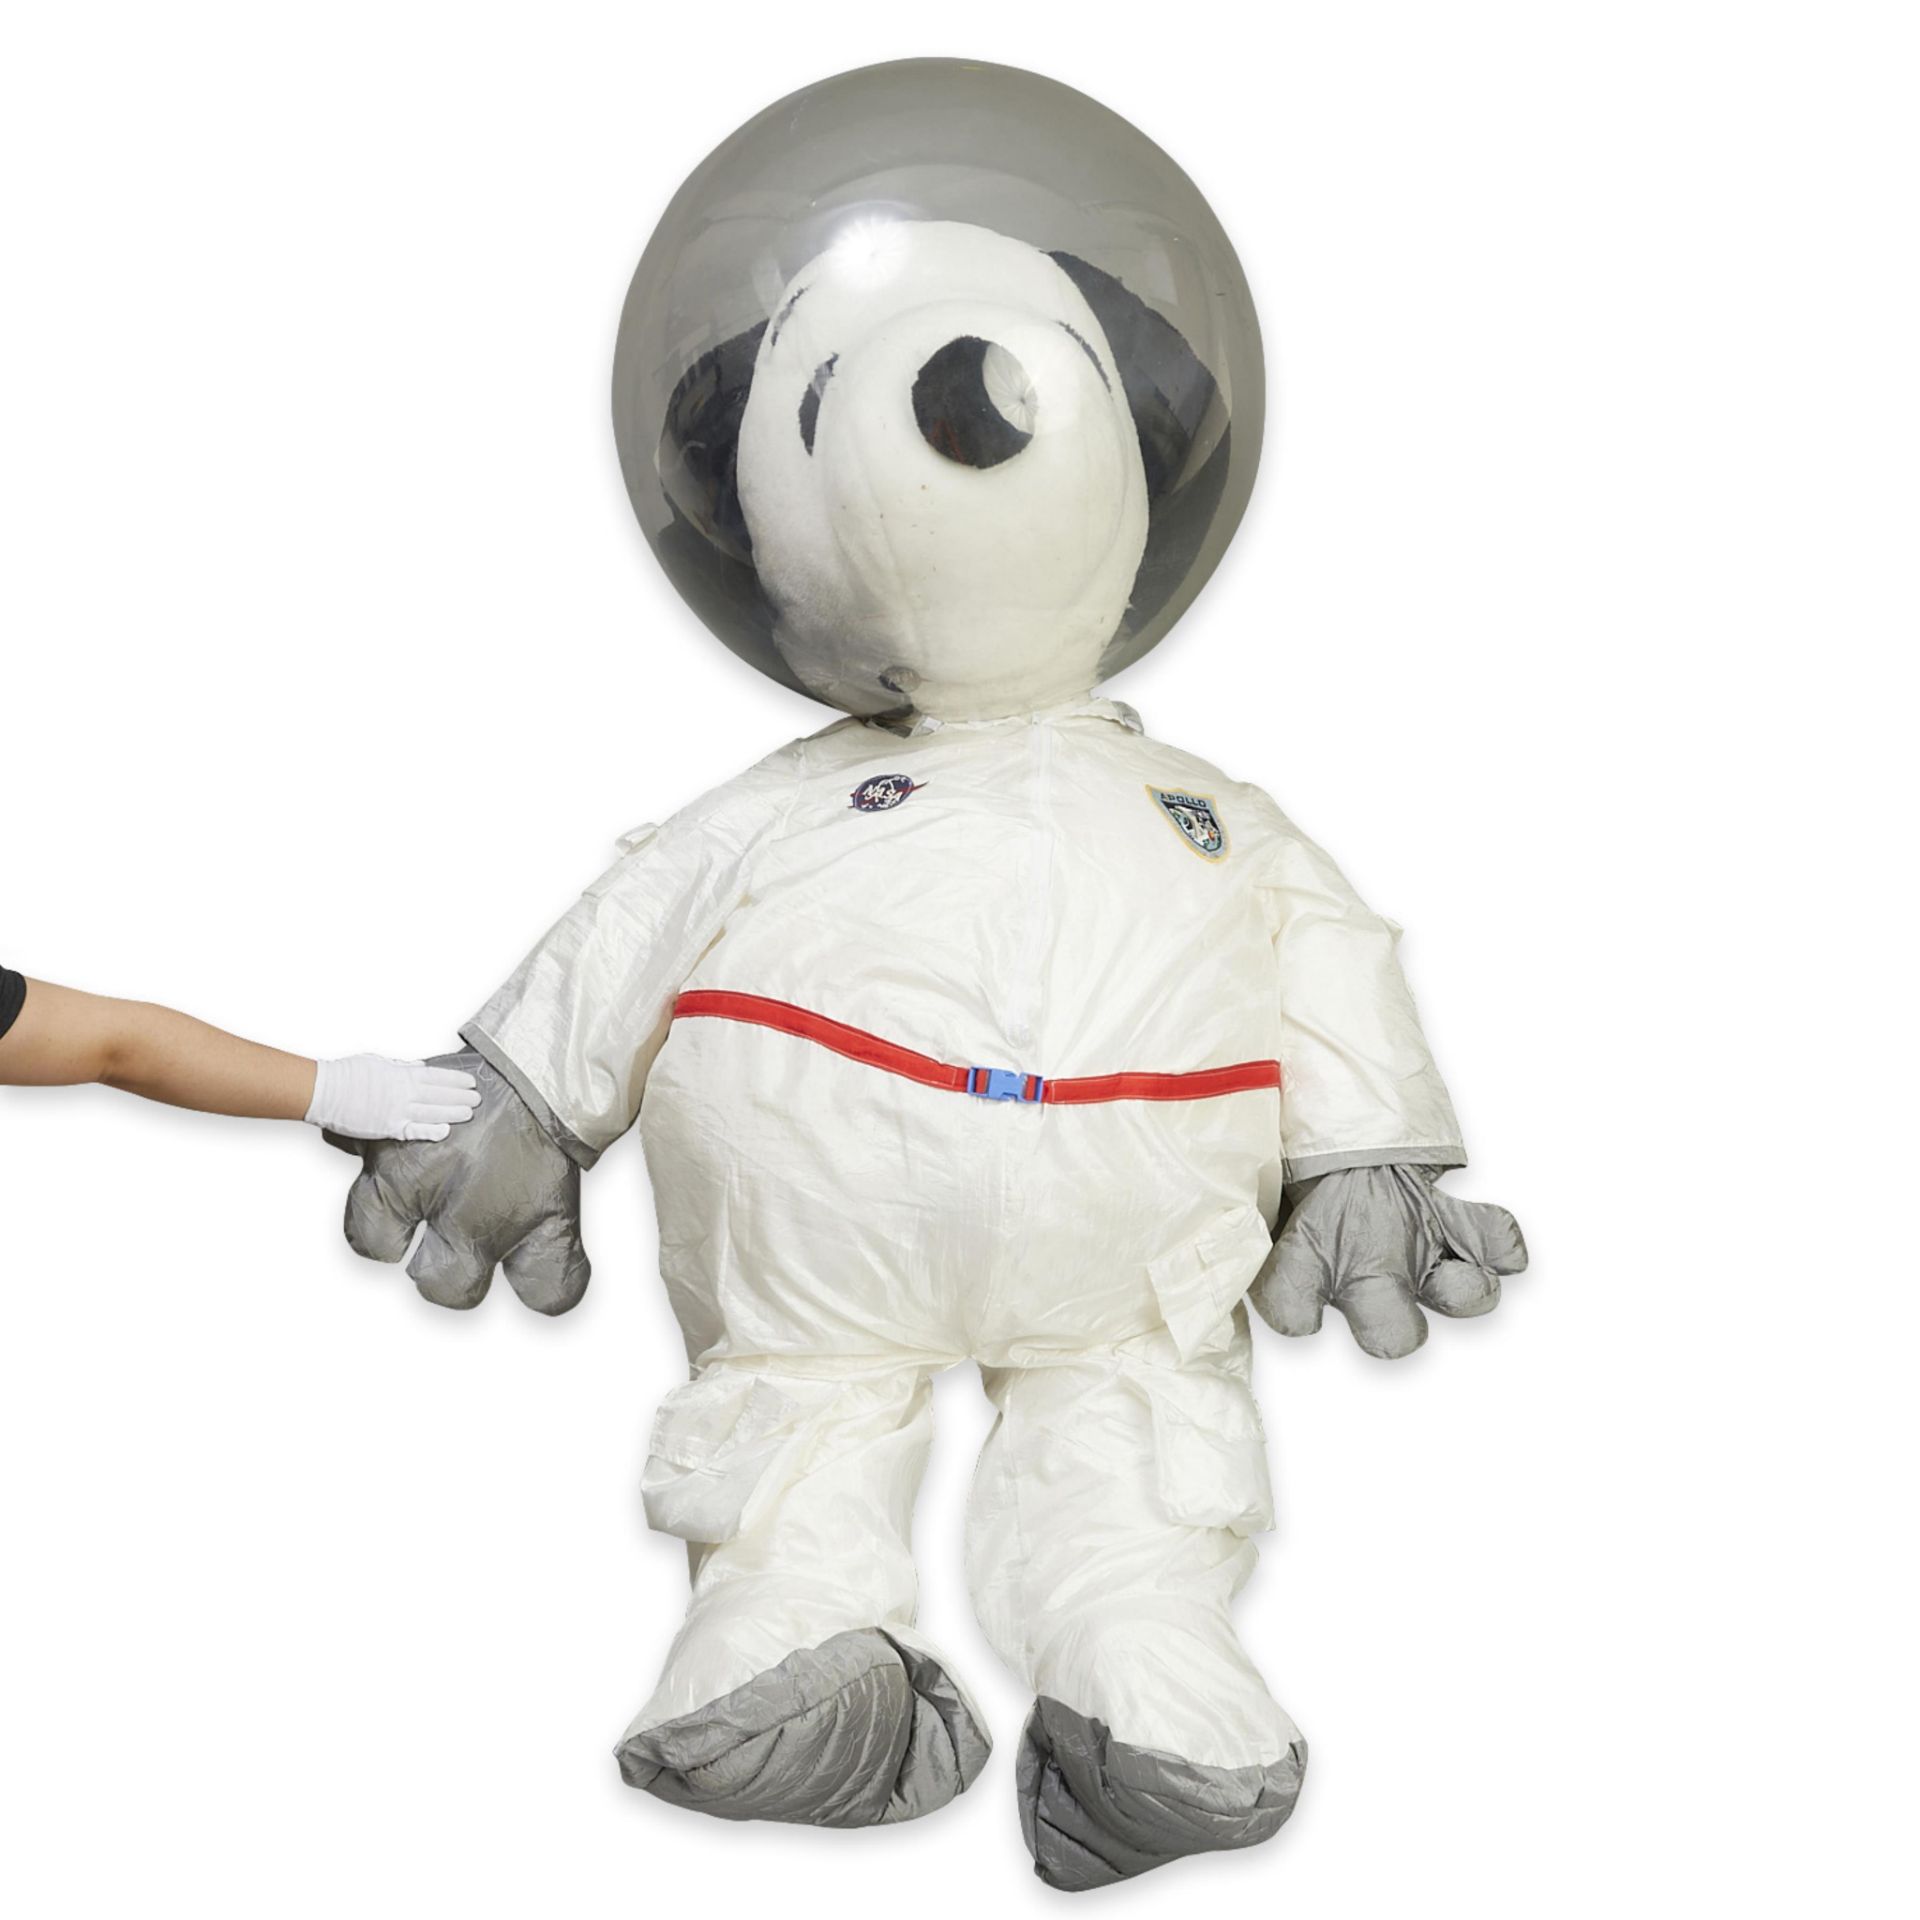 Very Large Stuffed Astronaut Snoopy Doll